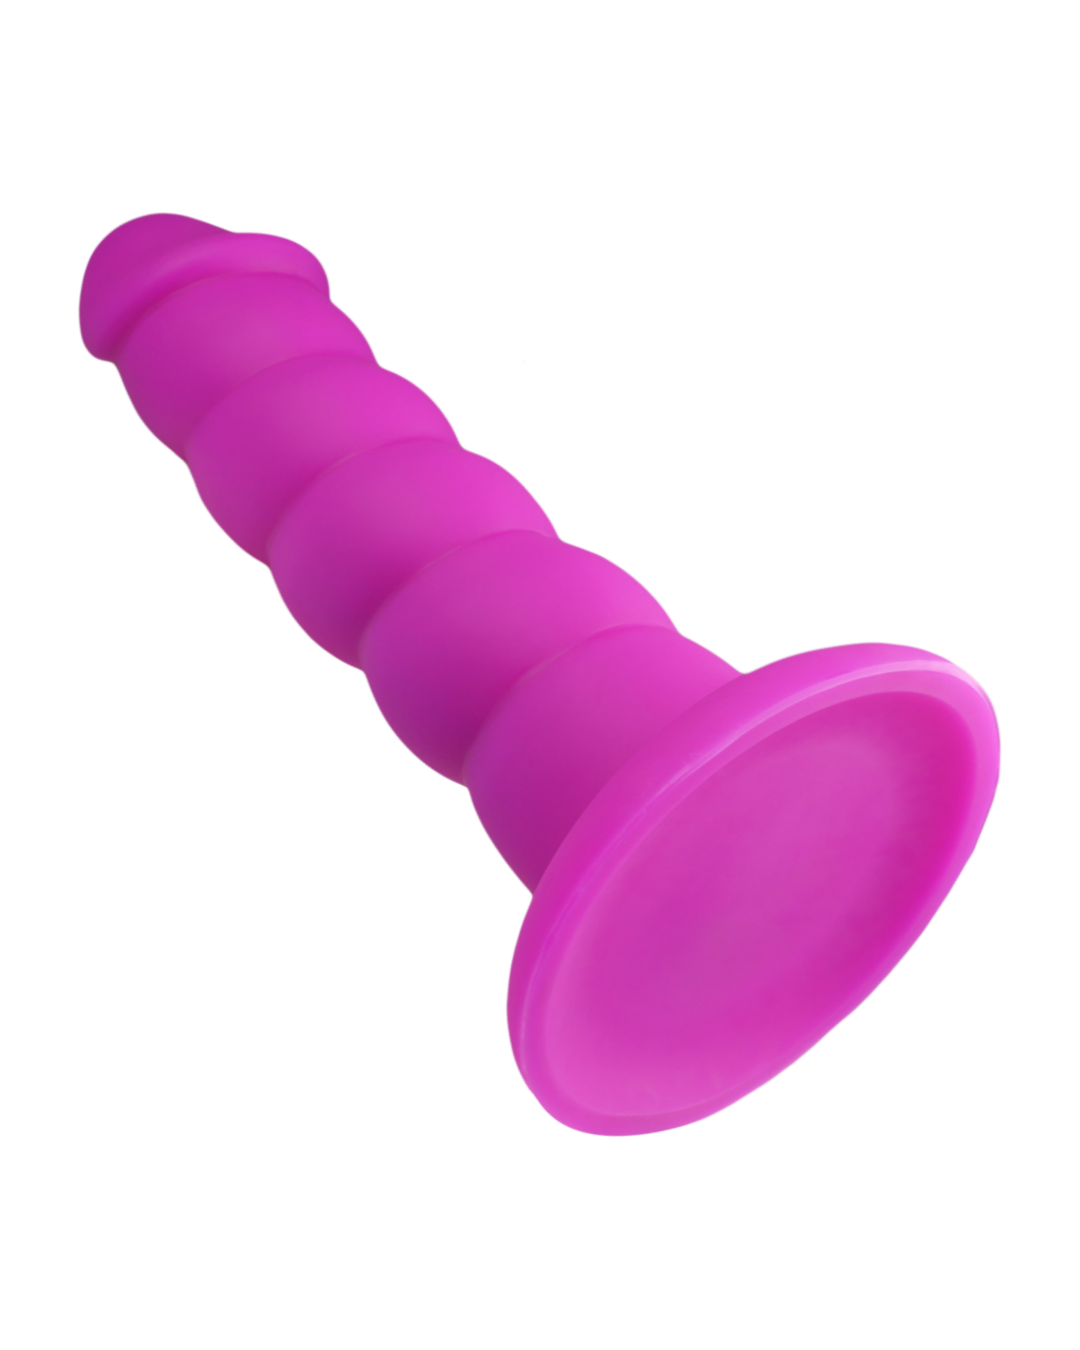 Suga Daddy 9.5 Inch Swirled Purple Silicone Dildo close up of suction cup